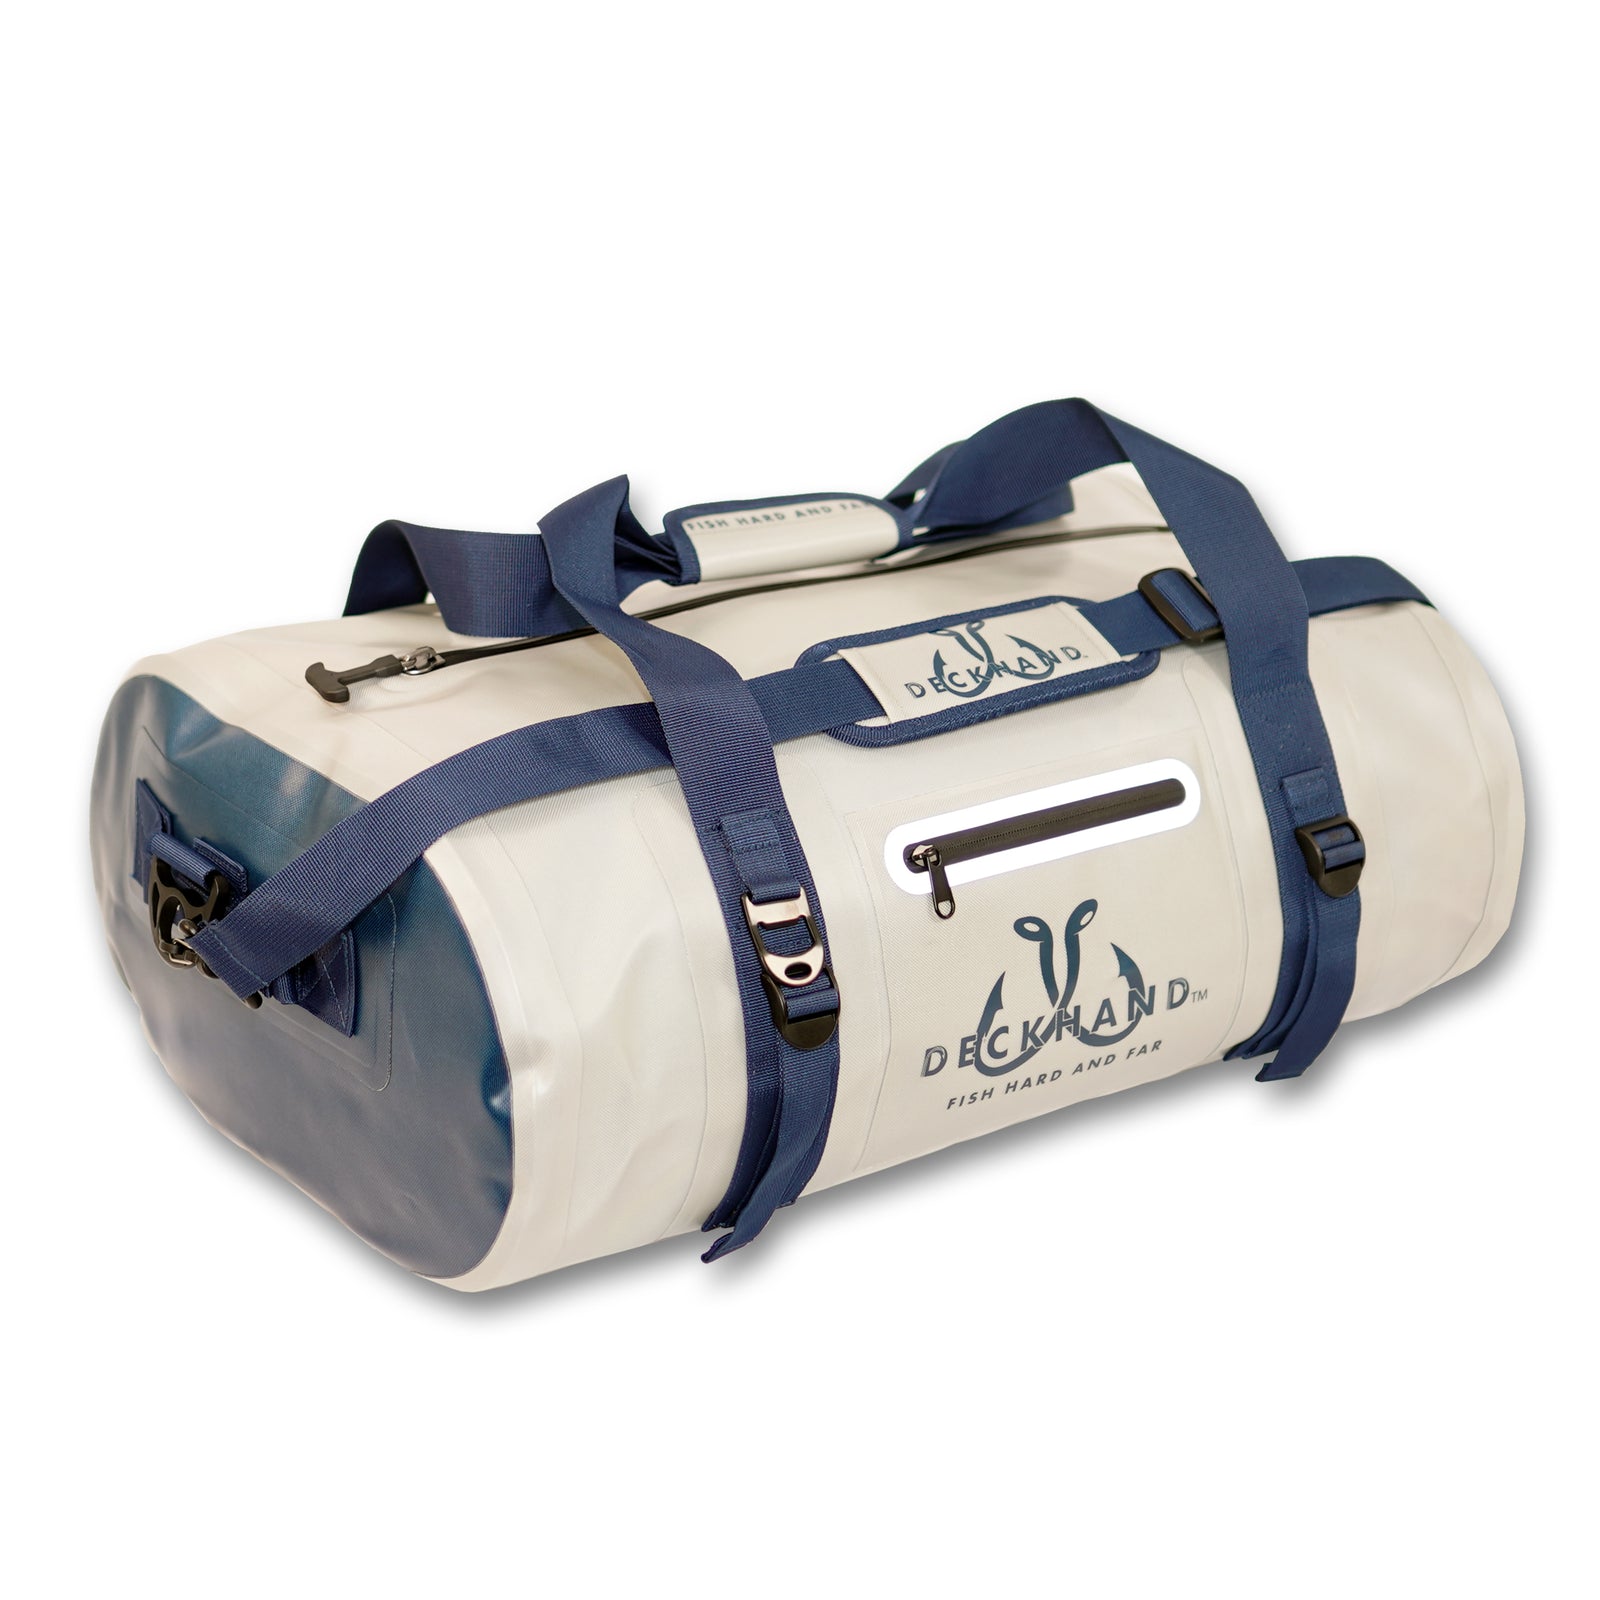 Dry Bags - Deckhand Sports